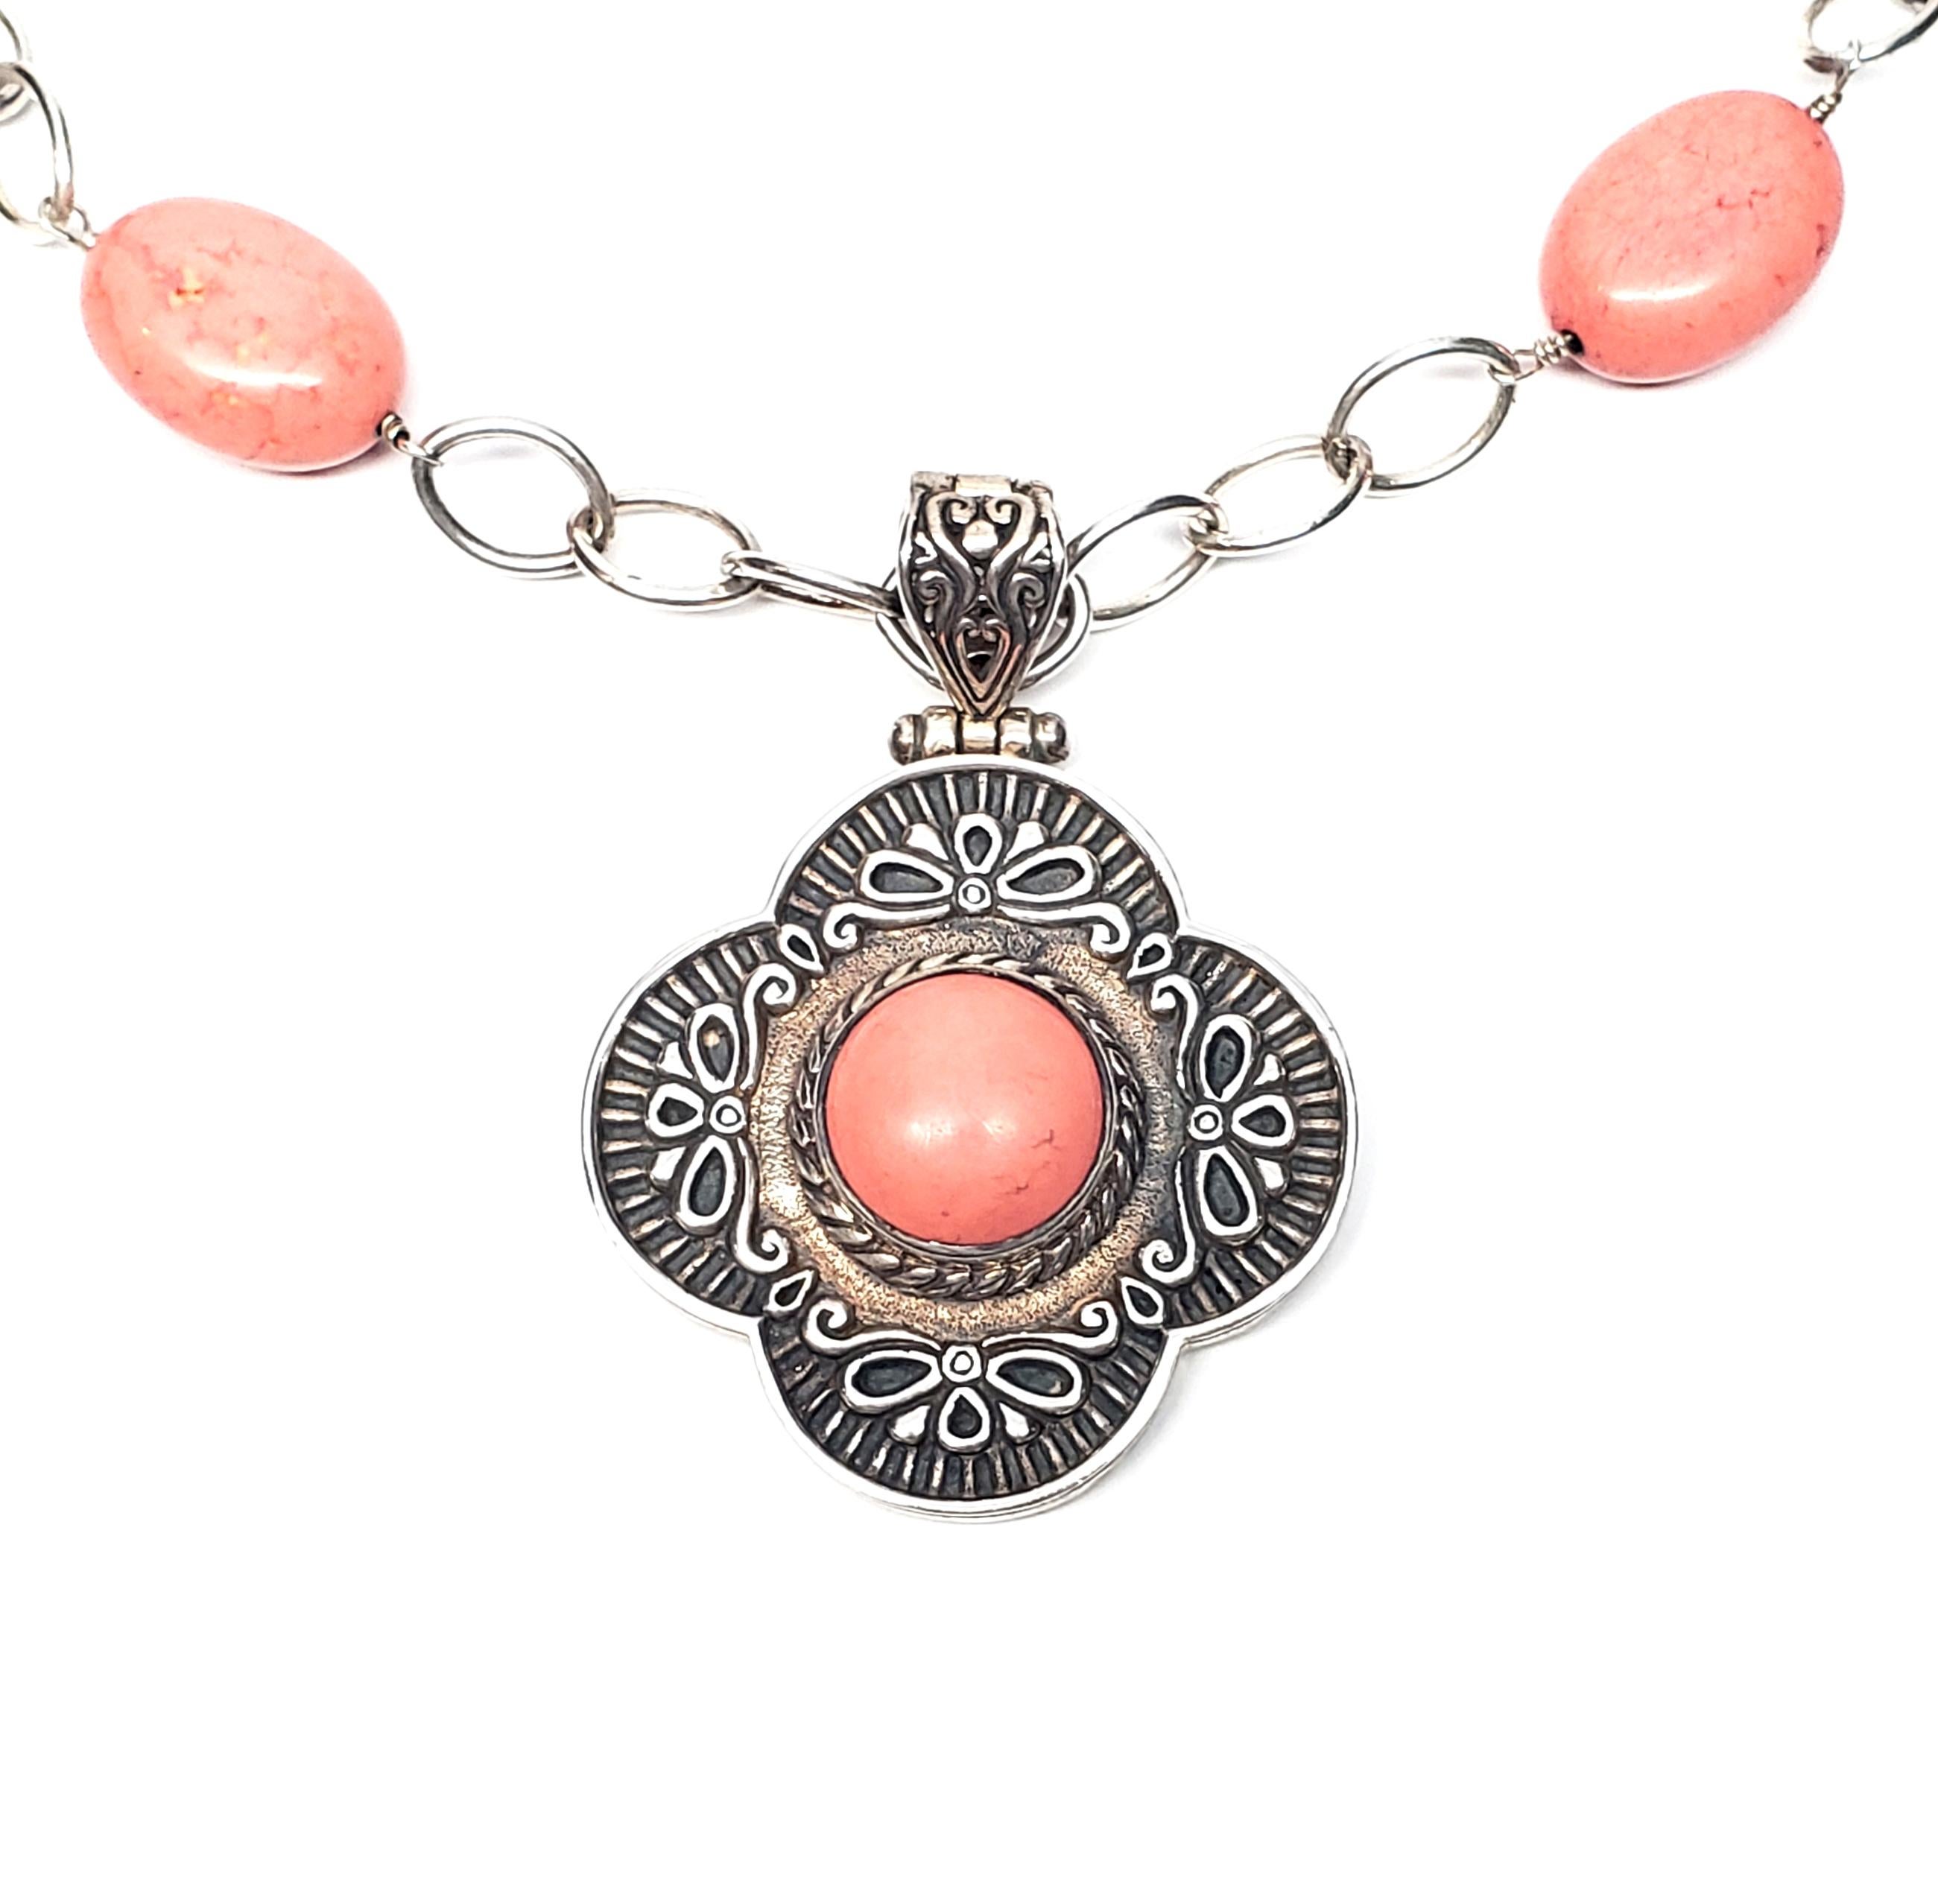 Sterling silver oval link and pink stone necklace with enhancer by Columbian artisan Claudia Agudelo.

Chain features oval sterling silver links alternating with large oval pink cabochon stones. Removable enhancer features a round pink cabochon